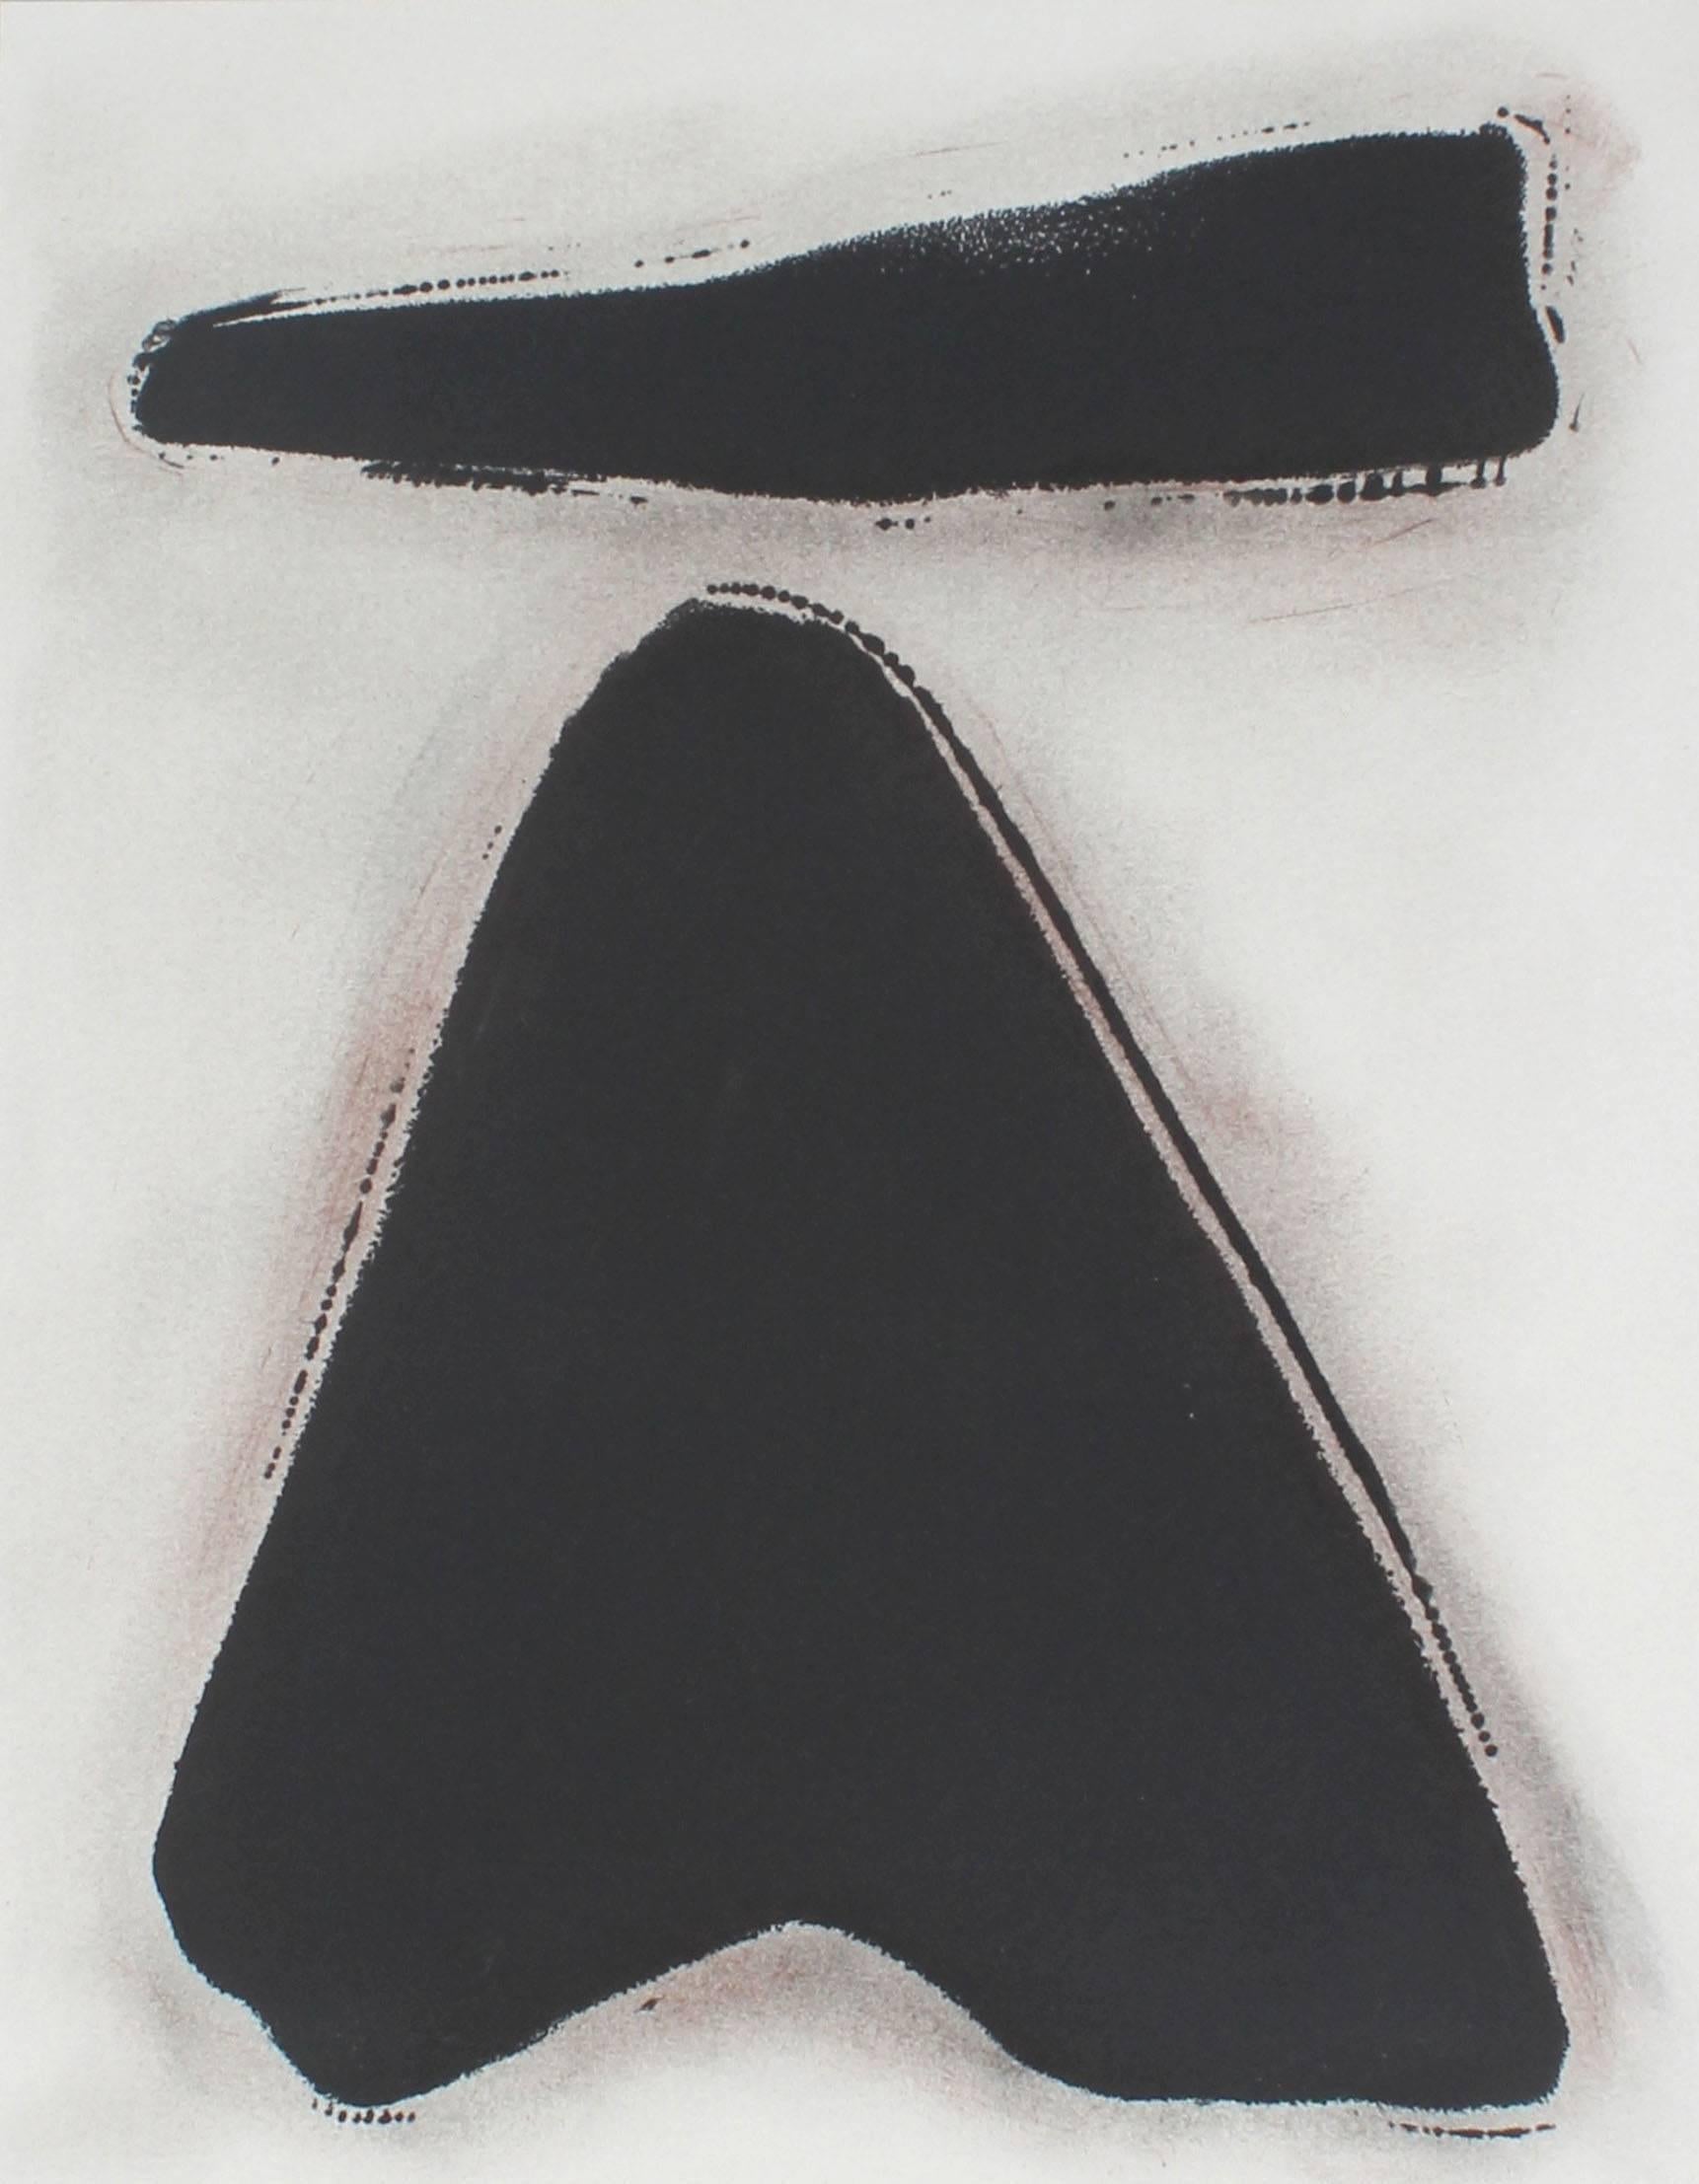 Rob Delamater Abstract Drawing - "Balance VII" Ink & Charcoal, 2014, R. Delamater